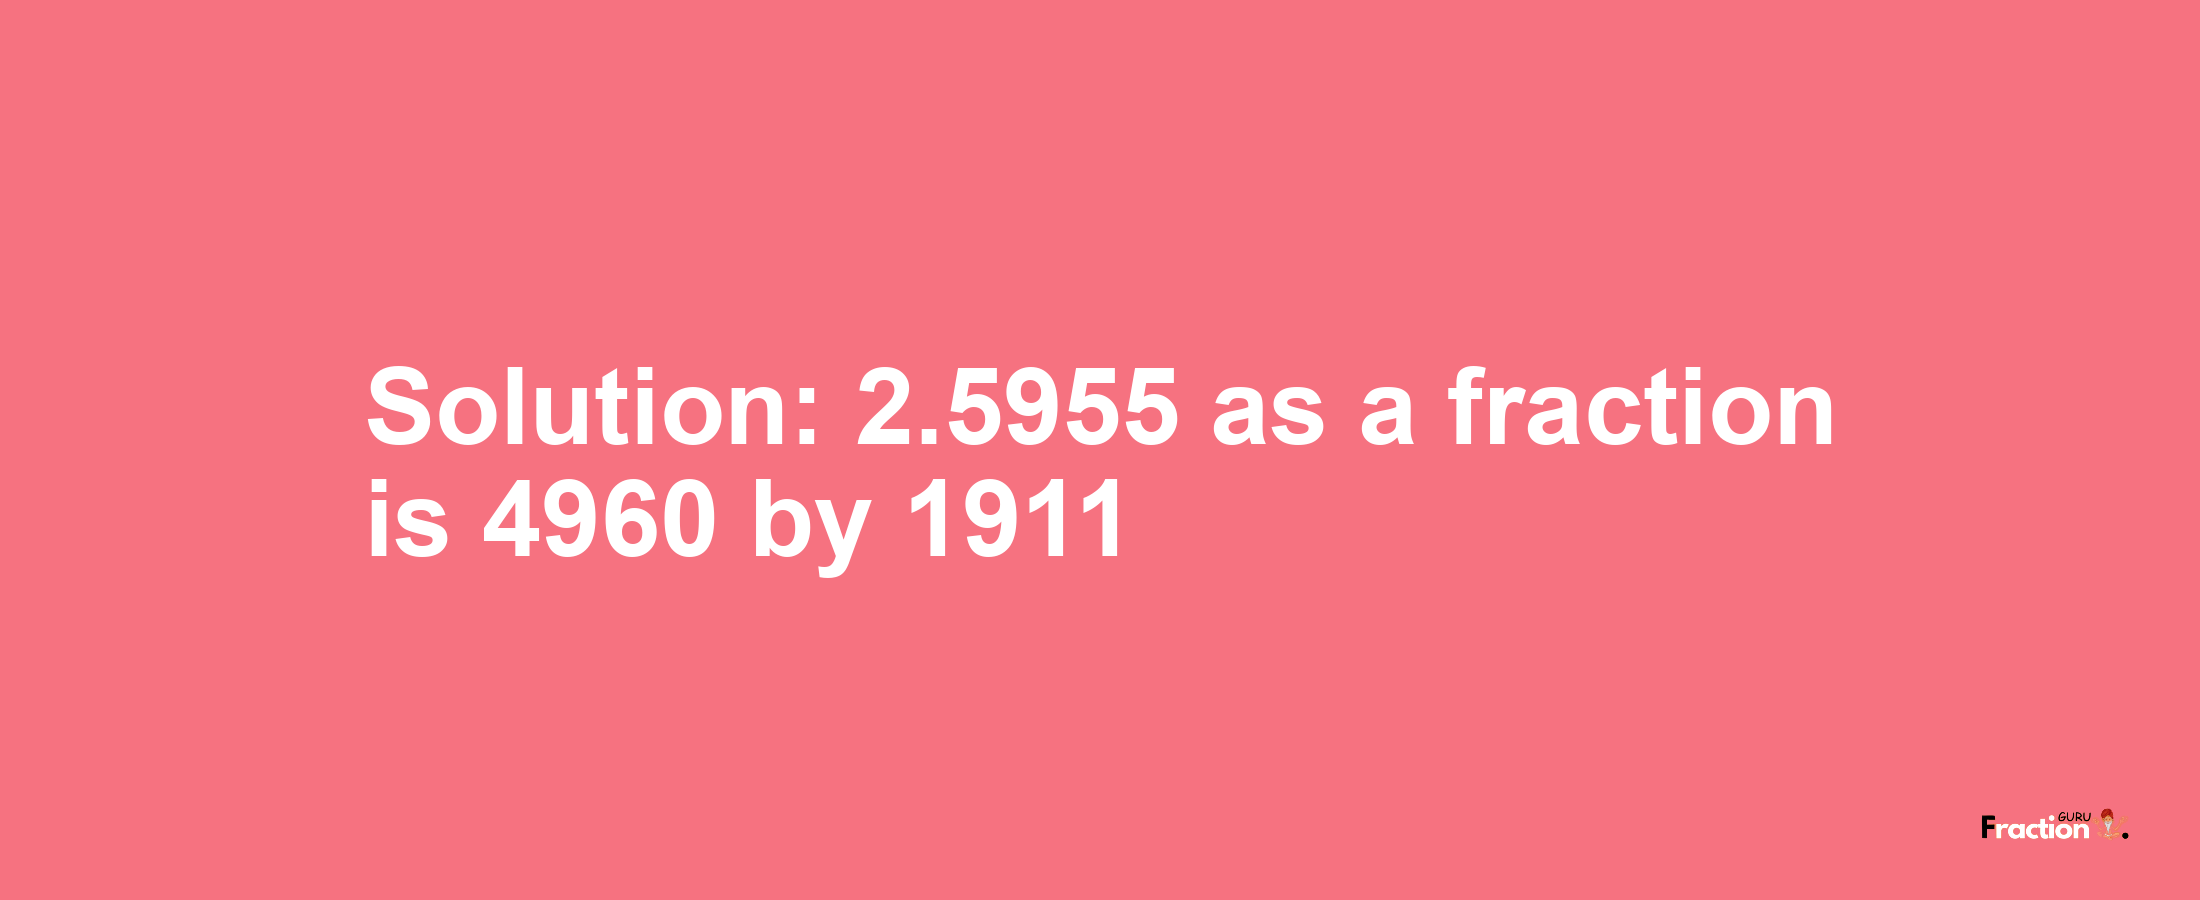 Solution:2.5955 as a fraction is 4960/1911